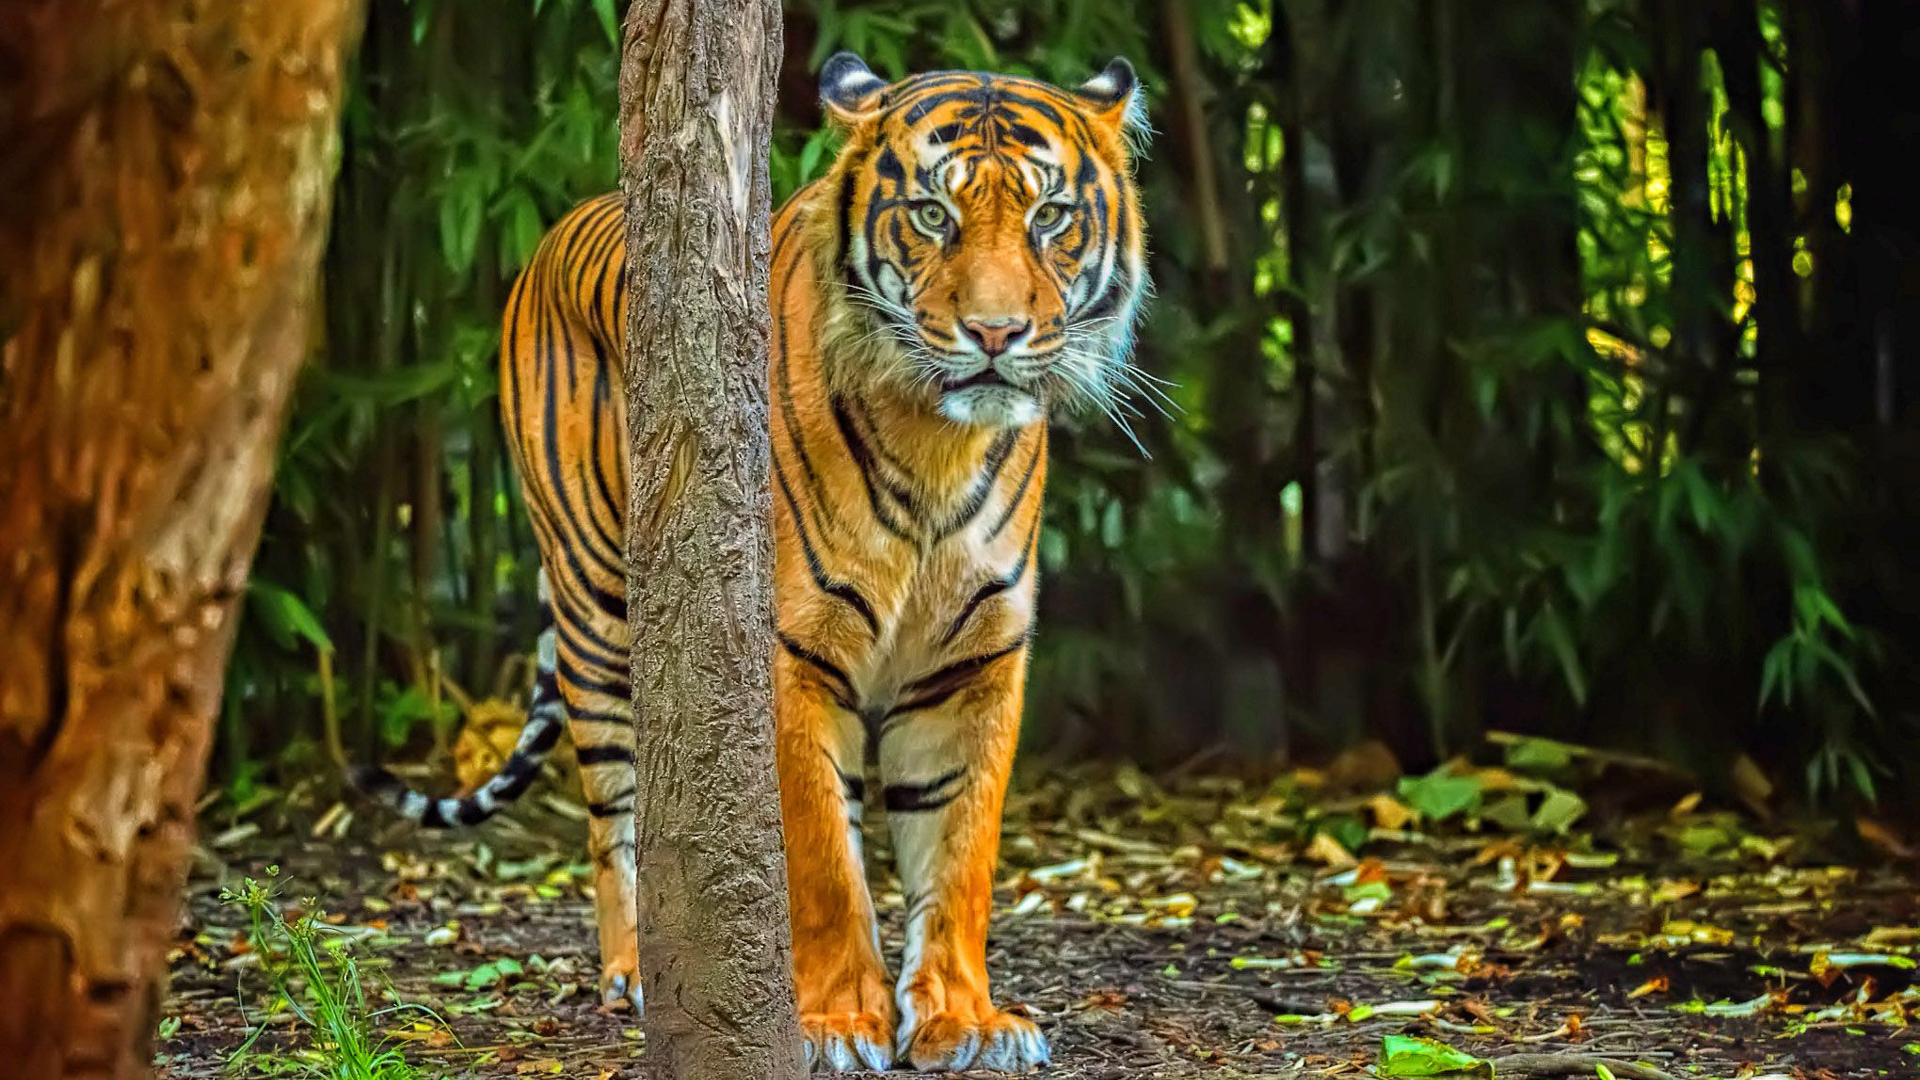 Tiger Is Standing In Forest Wallpaper HD Tiger